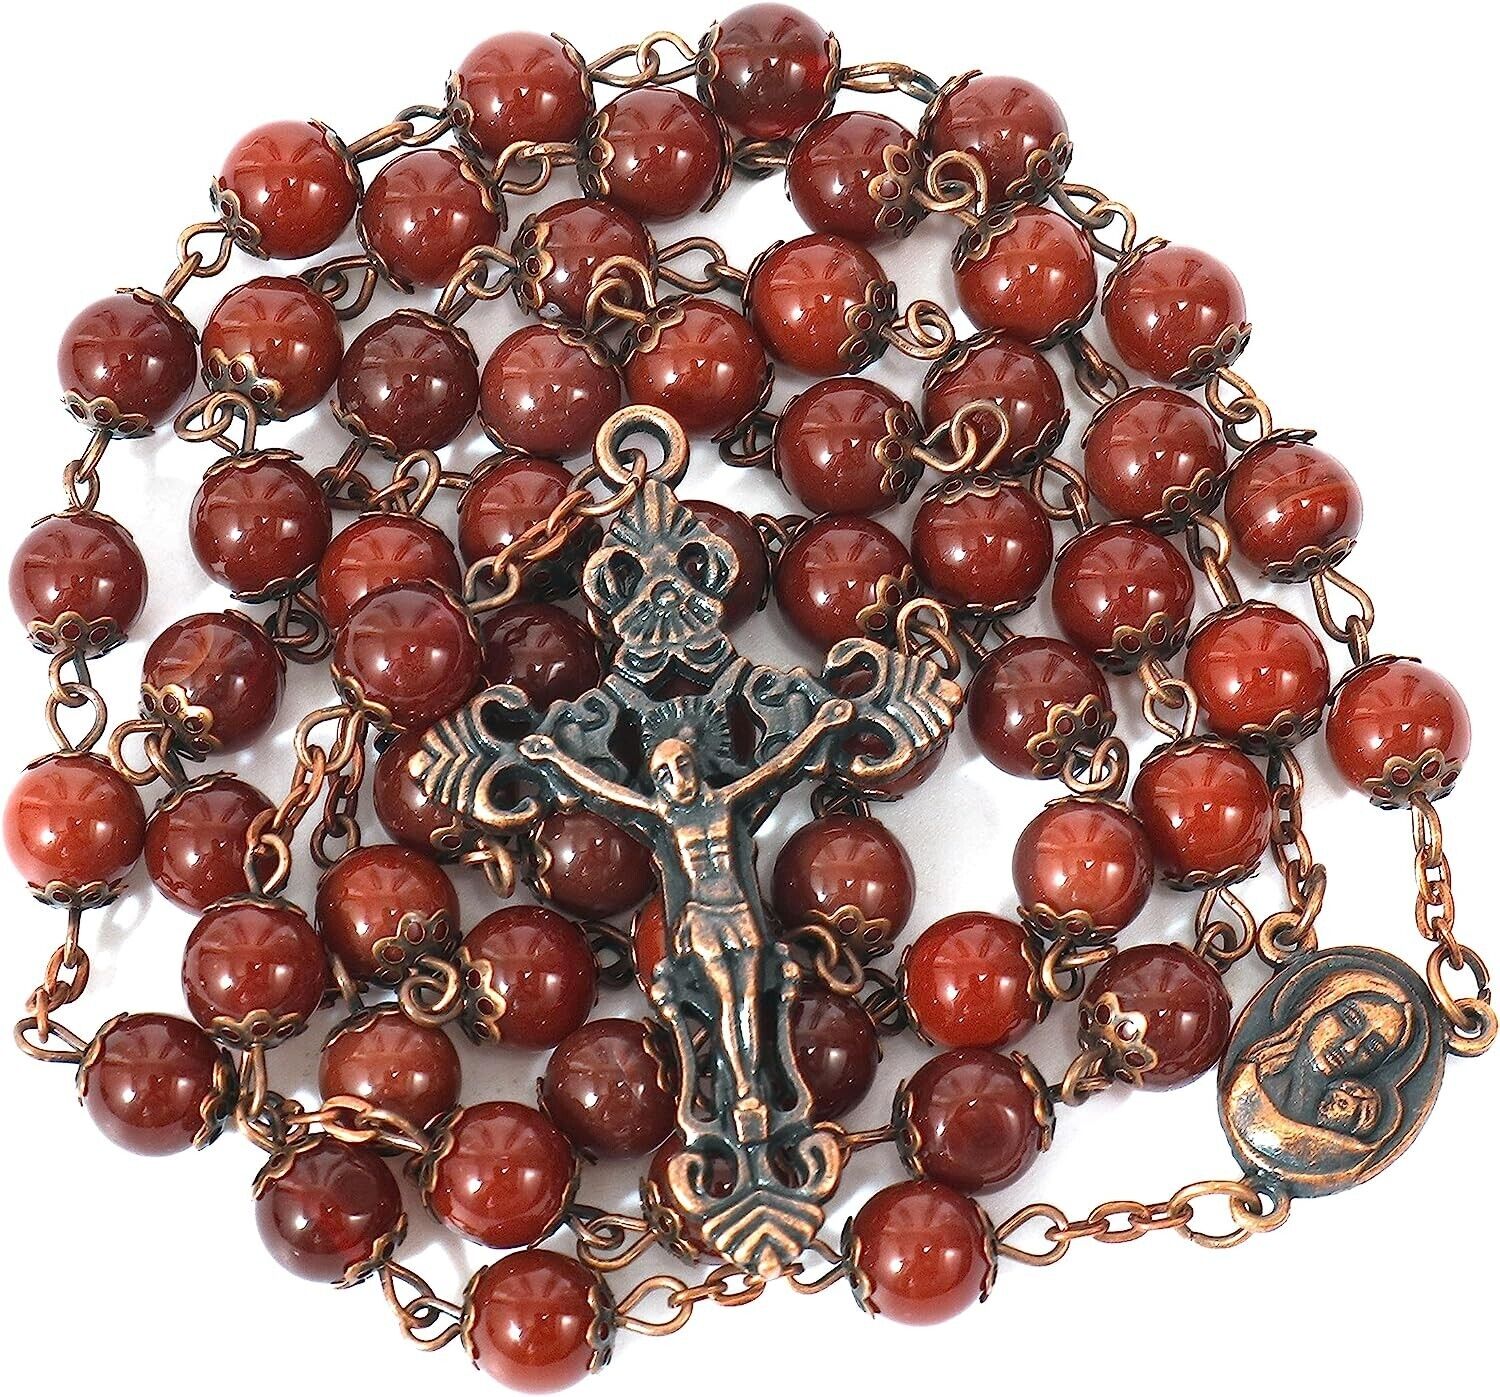 Red Carnelian Stone Beads Rosary Beaded Necklace Holy Soil & Cross Crucifix